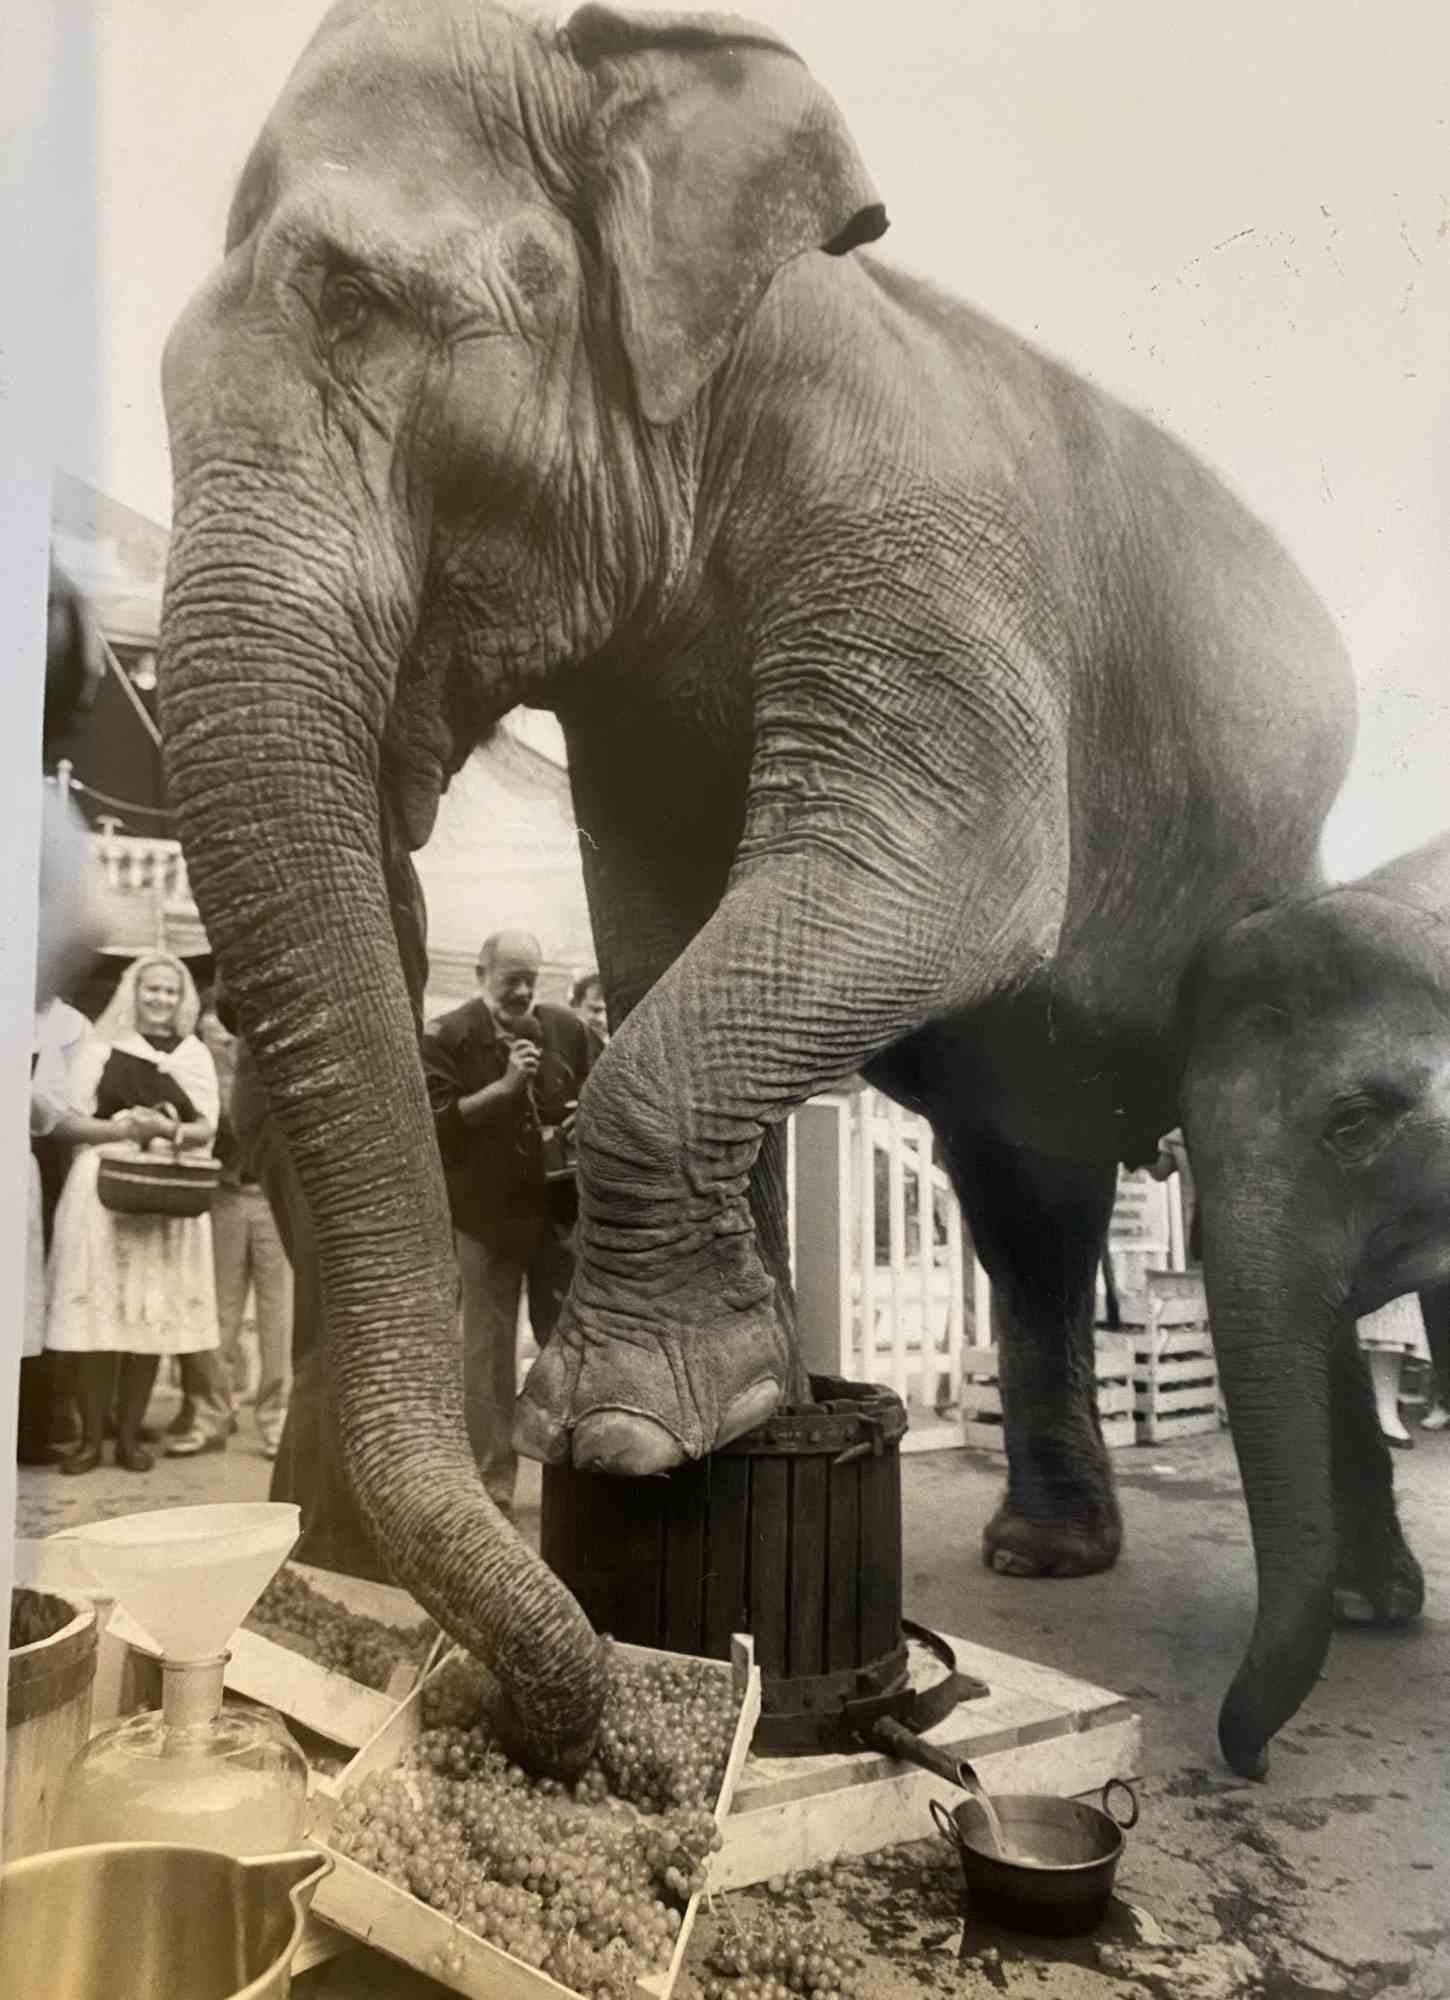 Elephant Eating Grapes - Photograph - 1960s